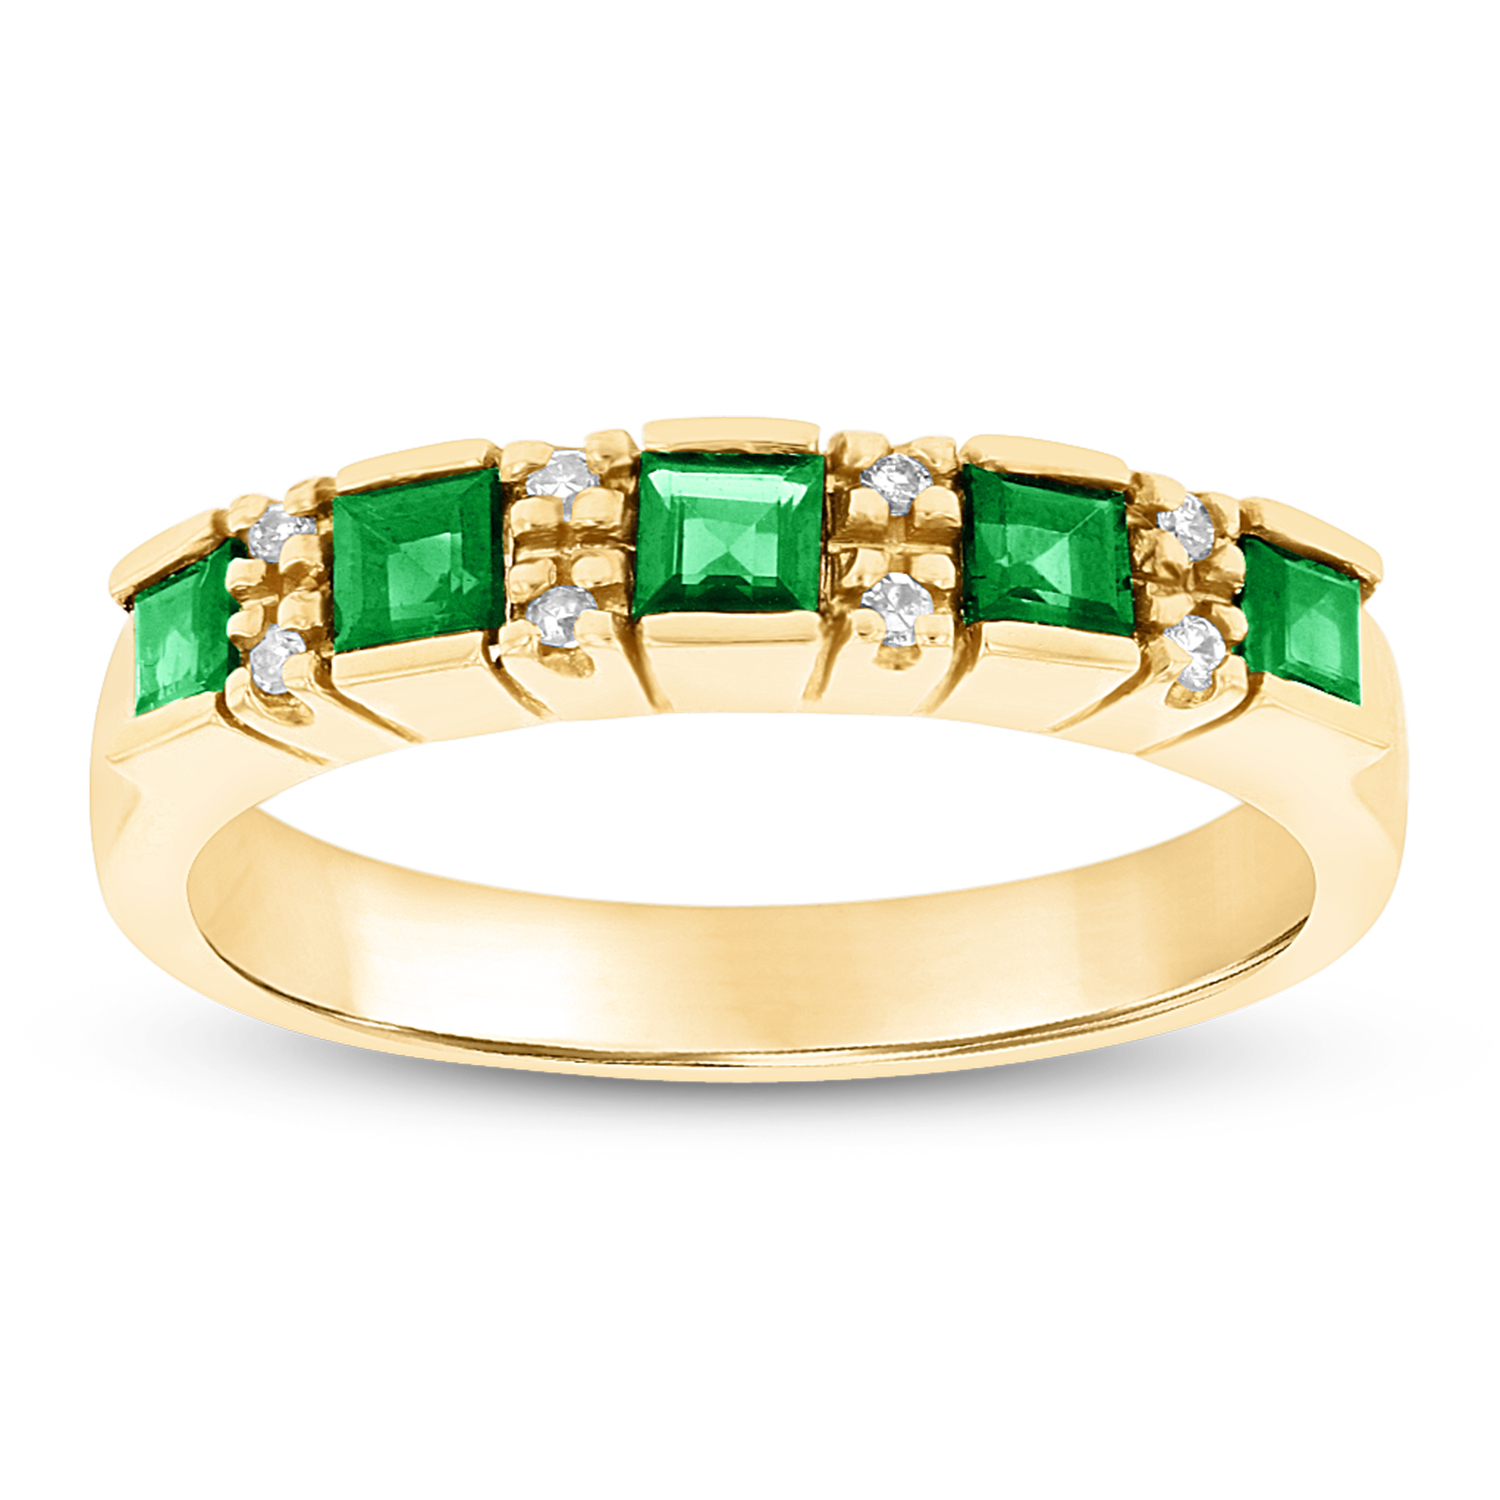 0.05ctw of Diamonds and Emeralds Wedding Band in 14k Yellow Gold